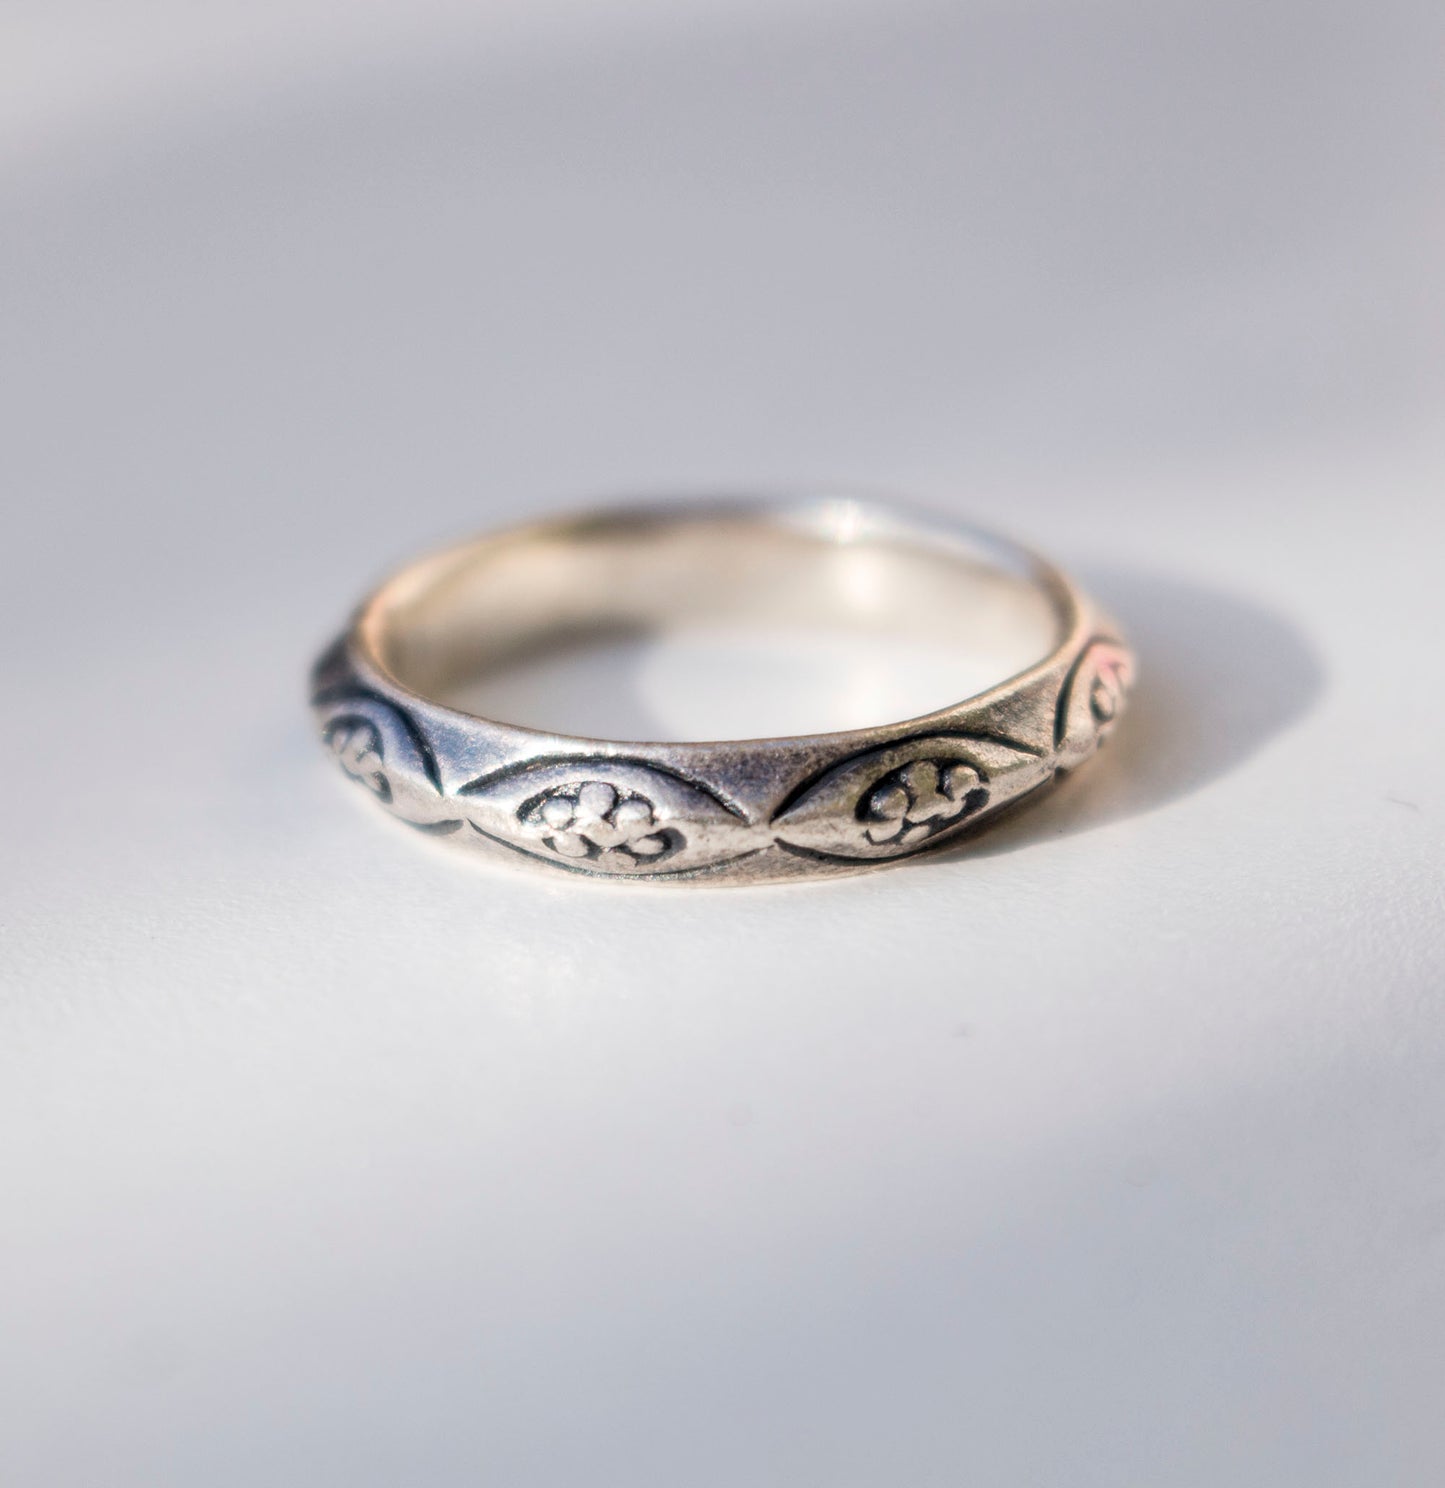 Stamped Sterling Silver ring